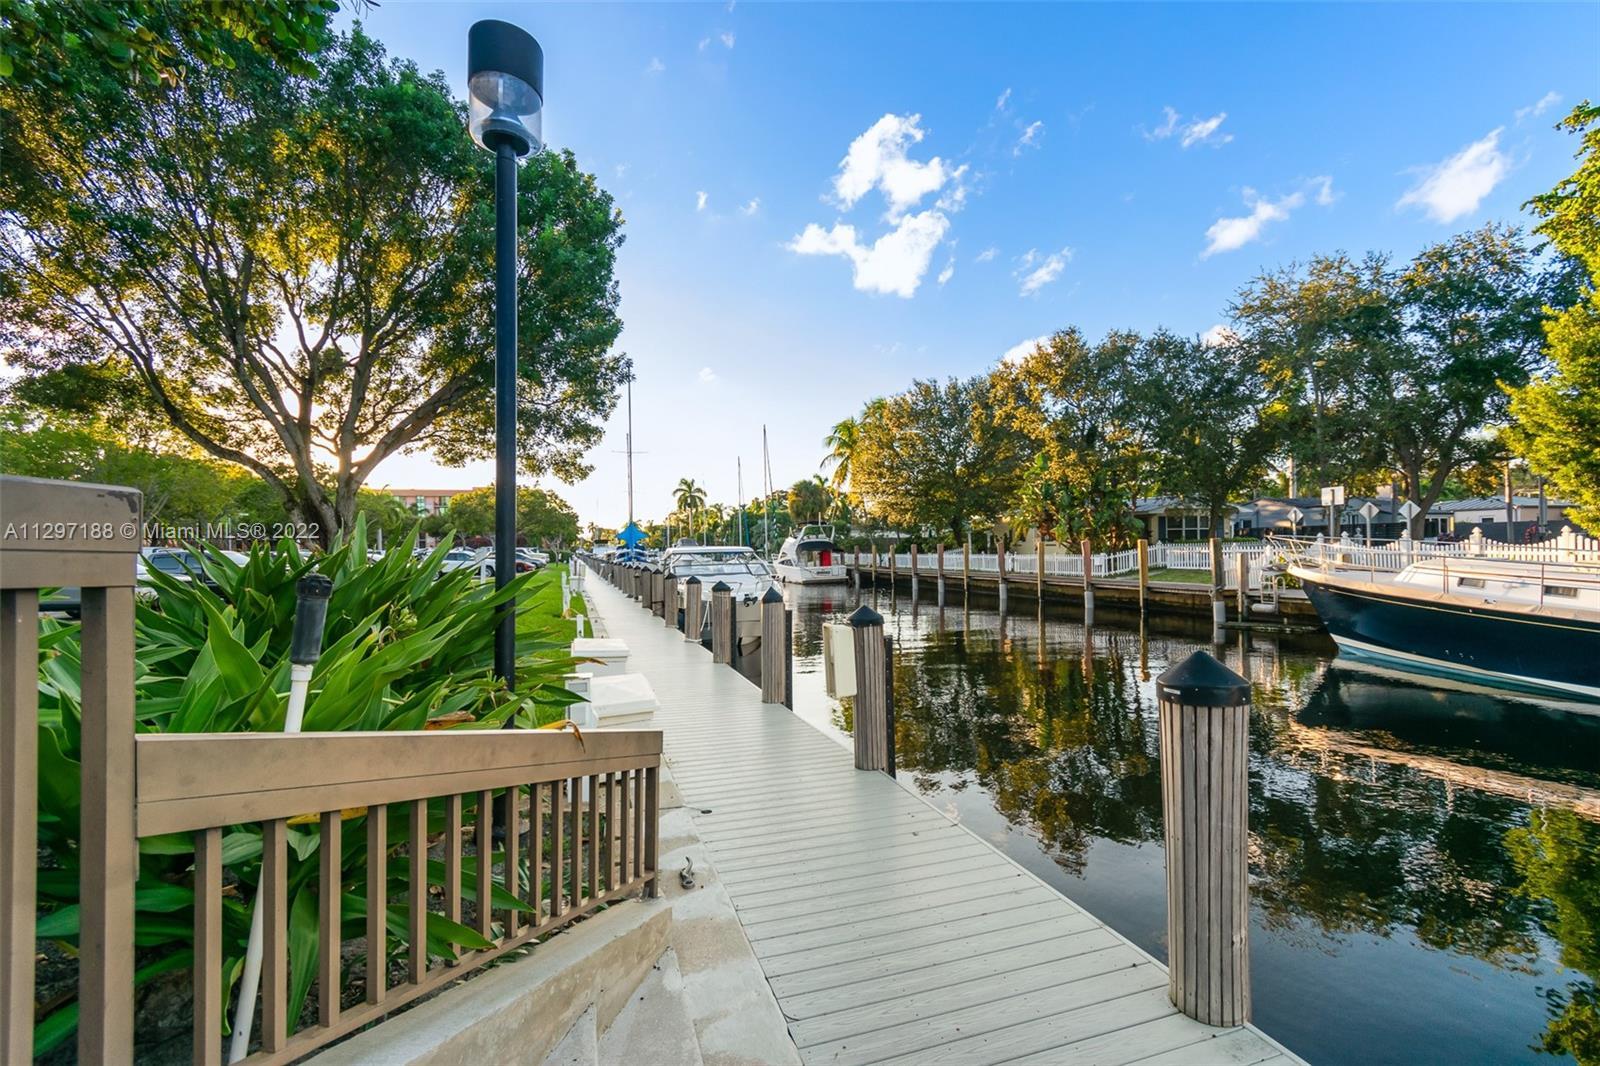 Enjoy the tropical side of Fort Lauderdale in one of the areas best-kept secrets! River Reach, a pri